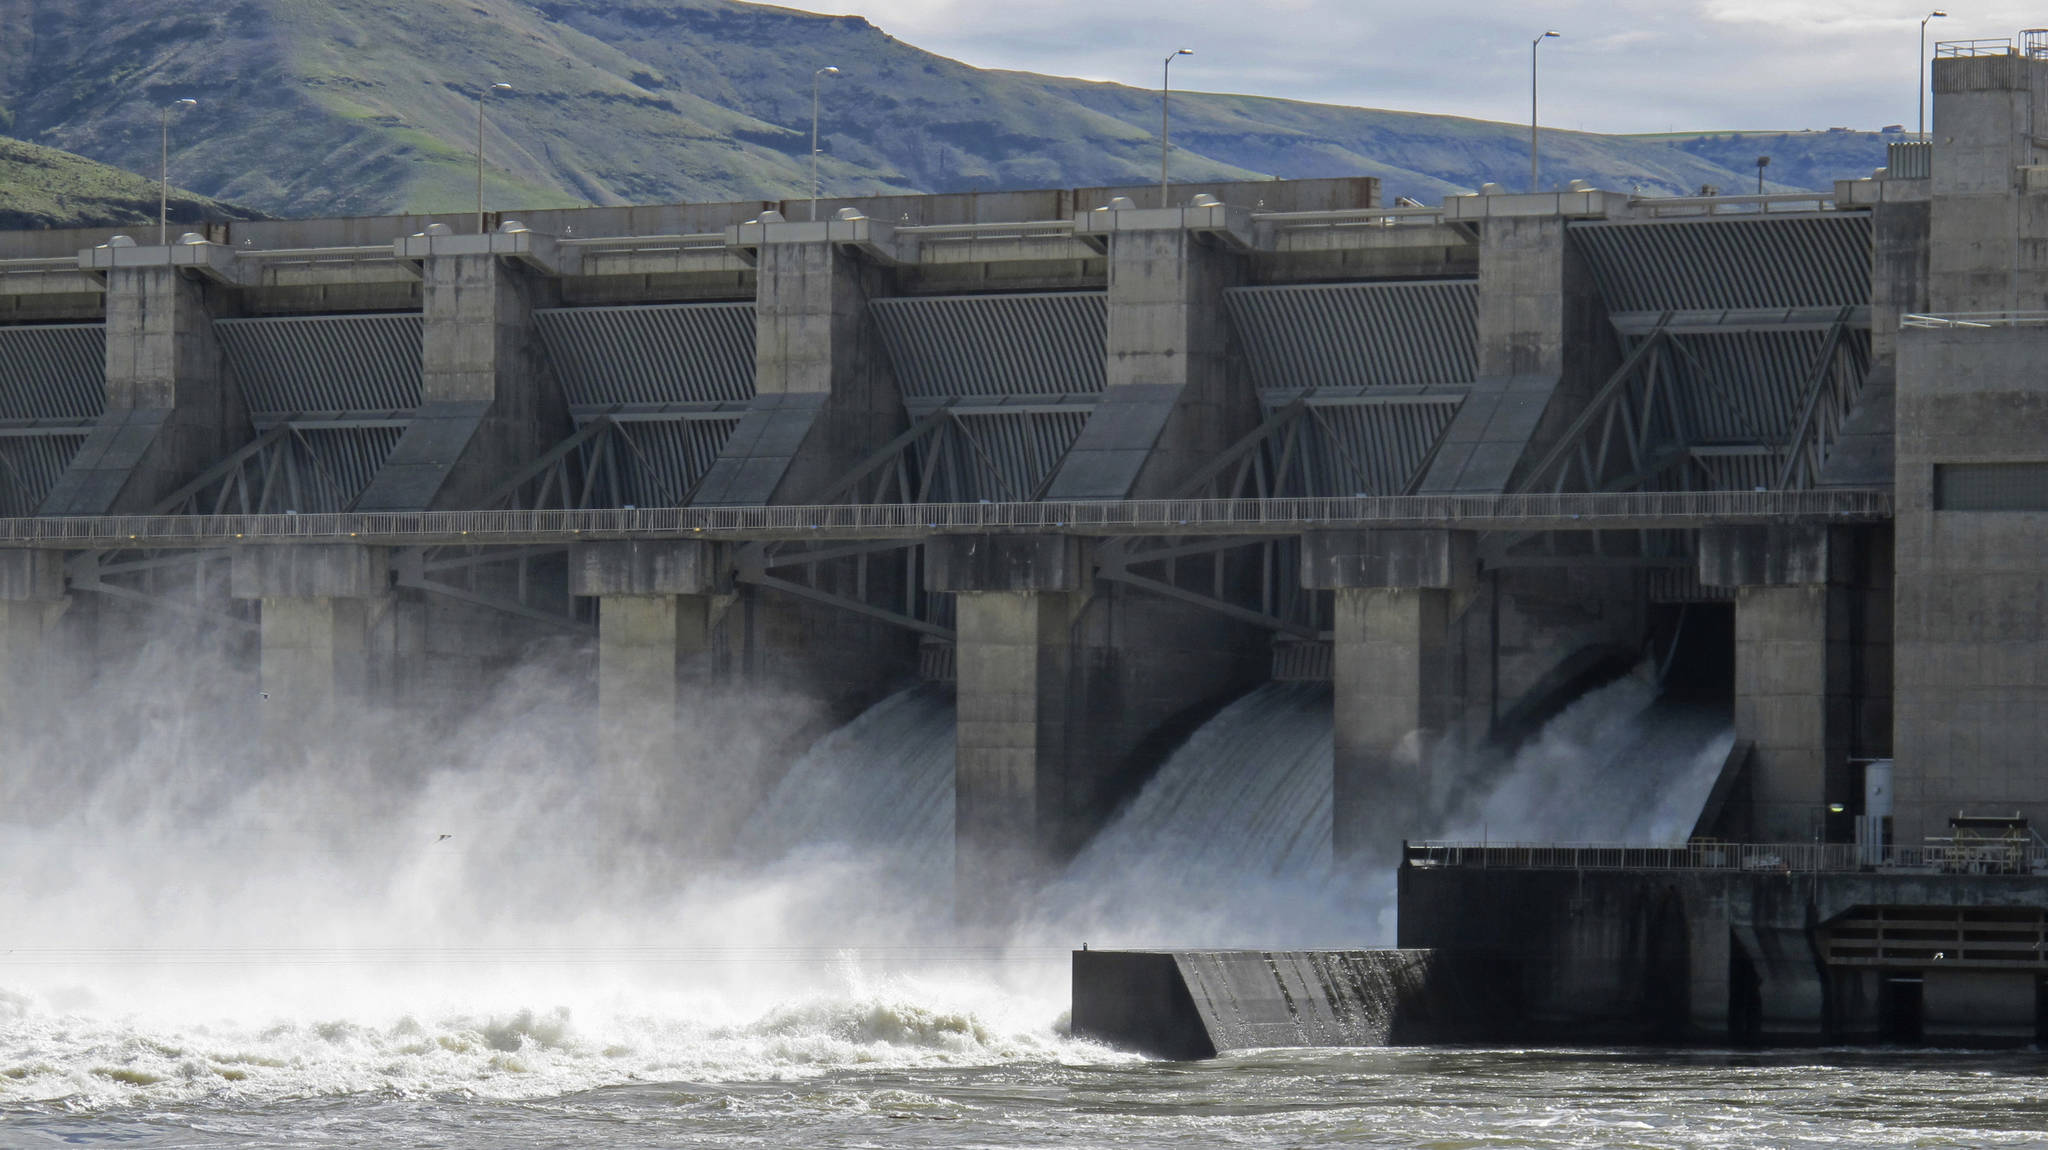 In this April 11, 2018, file photo, water moves through a spillway of the Lower Granite Dam on the Snake River near Almota, Wash. Some Republican members of Congress from the Northwest are accusing a GOP Idaho lawmaker of conducting secret negotiations with the Democratic governor of Oregon over a controversial proposal to breach four dams on the Snake River to save endangered salmon runs. (Nicholas K. Geranios/The Associated Press, file)